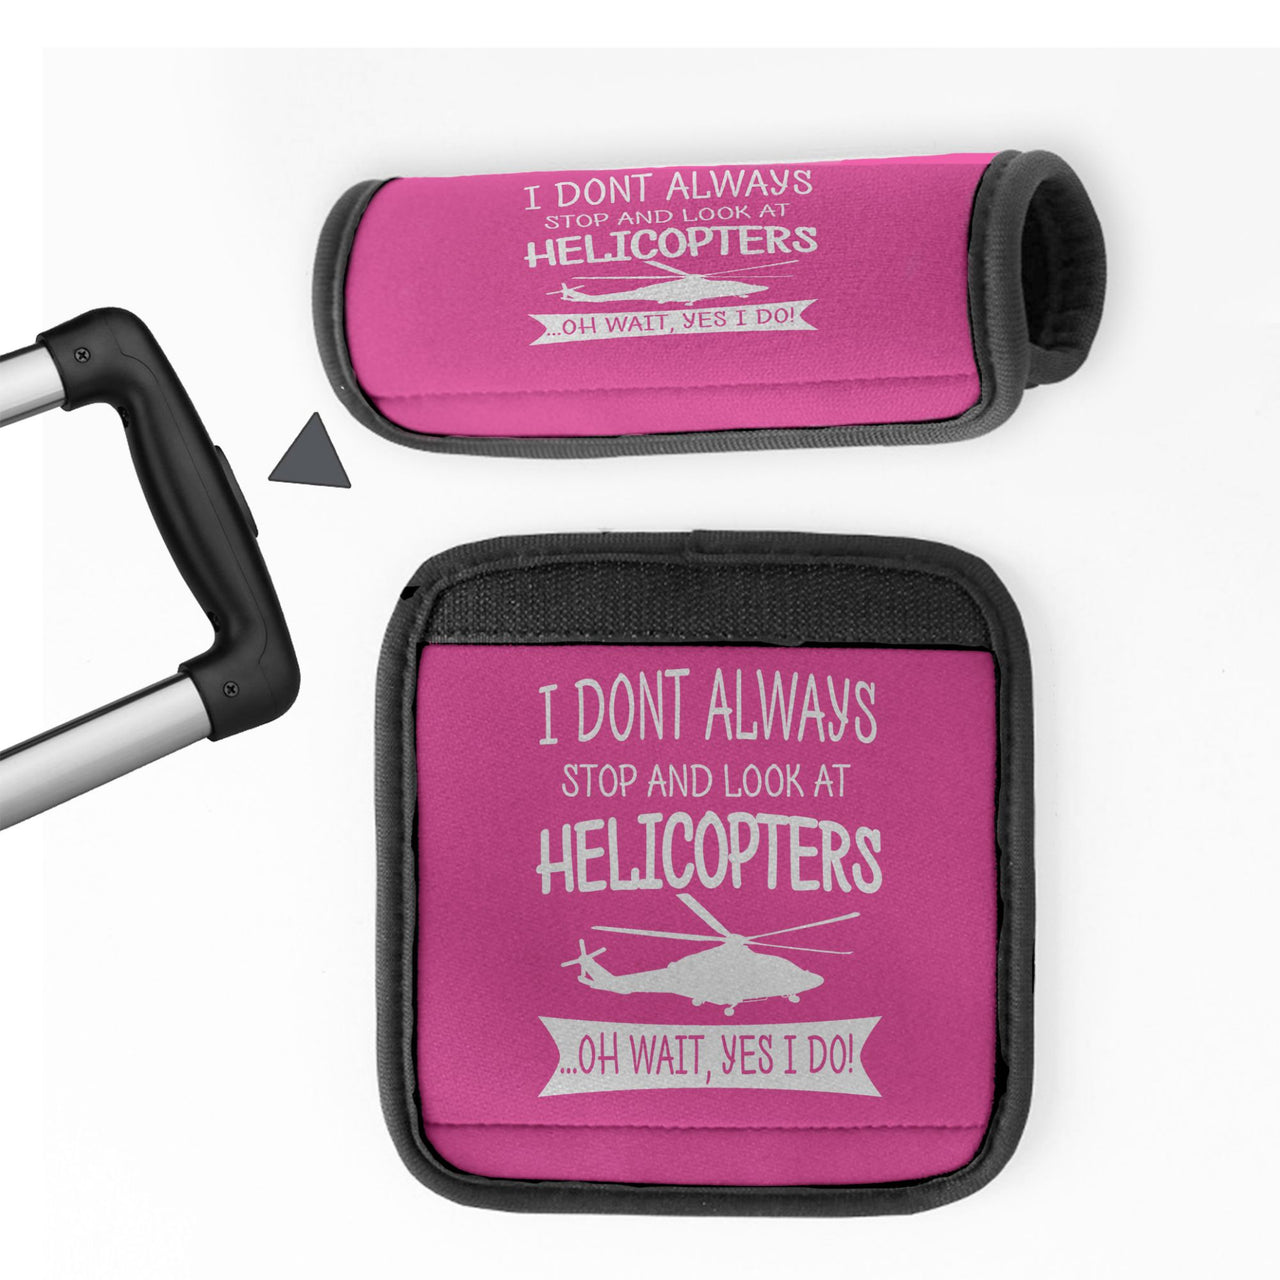 I Don't Always Stop and Look at Helicopters Designed Neoprene Luggage Handle Covers